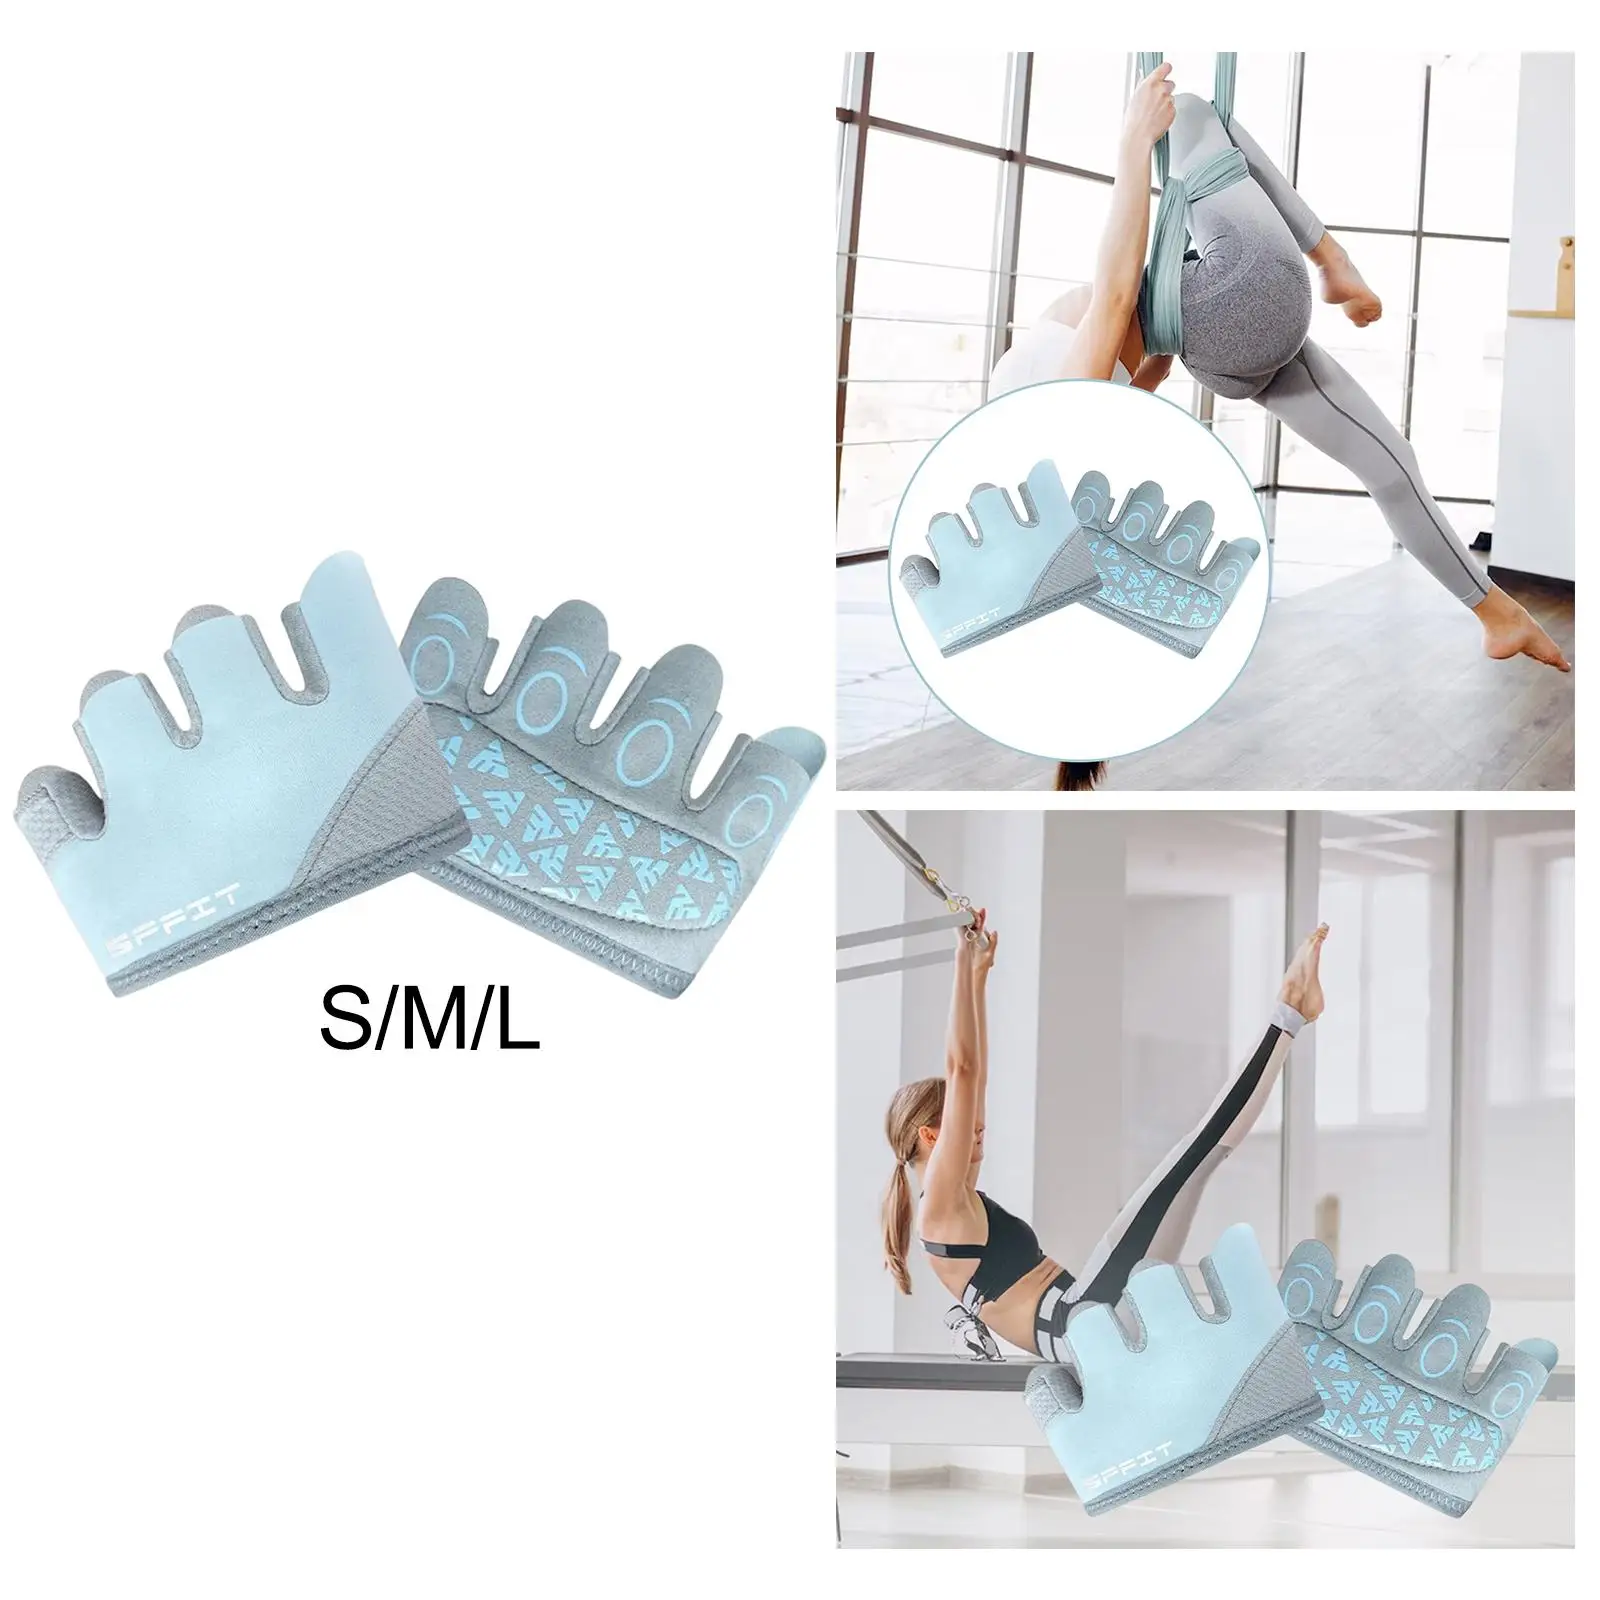 2Pcs Half Finger Workout Gloves Women Yoga Gloves Weight Lifting Gloves Half Hand Gloves for Exercise Power Lifting Bodybuilding